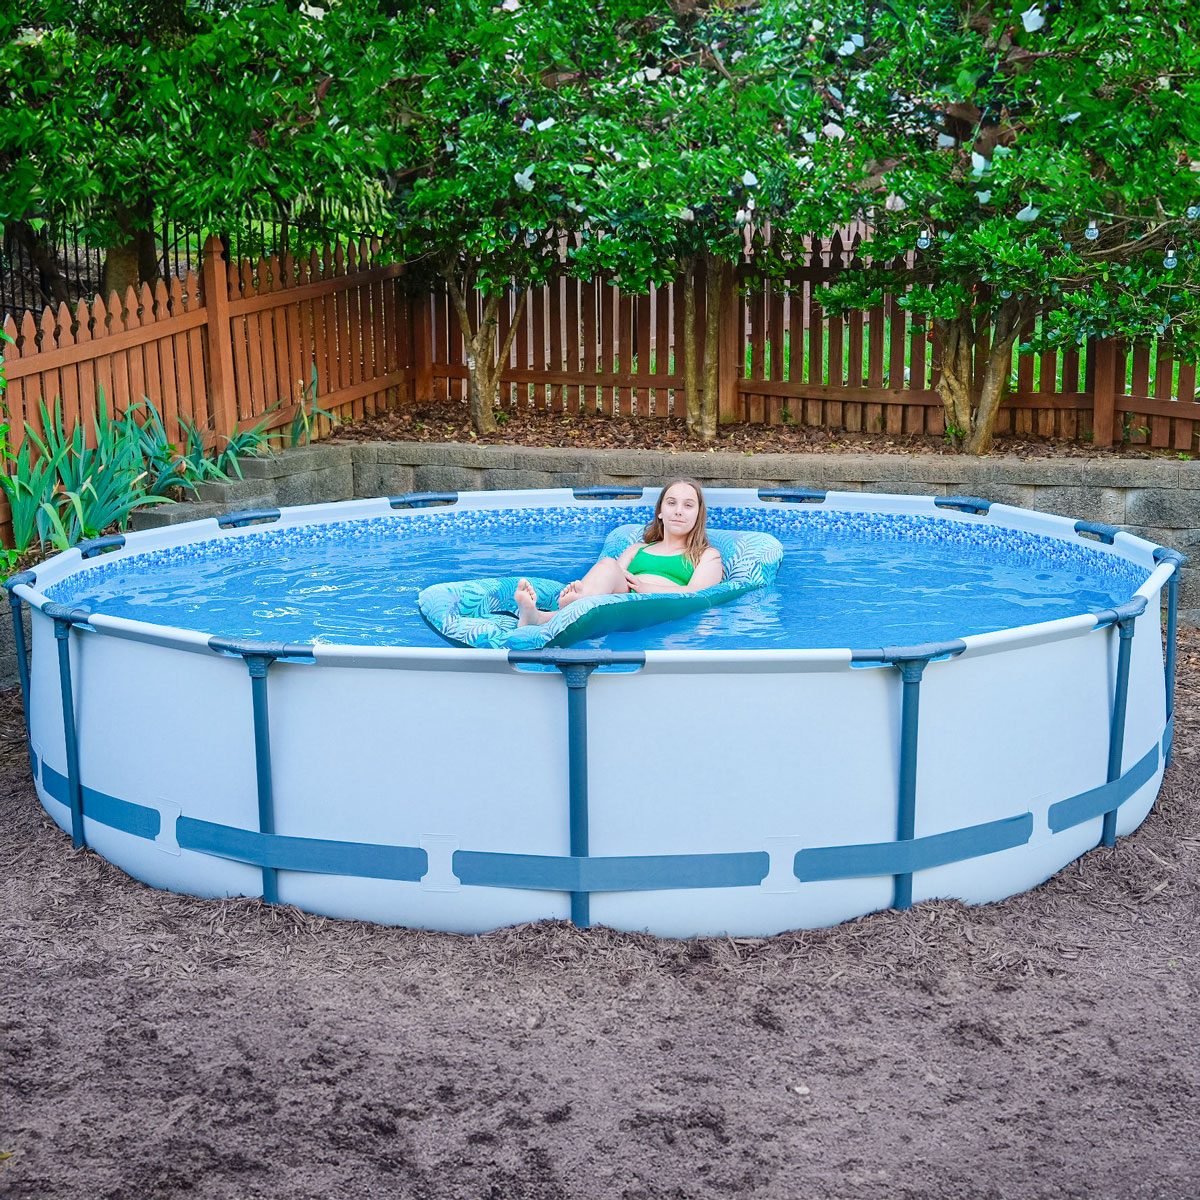 Bestway Above Ground Pool Review: An Easy, Affordable Summer Hack